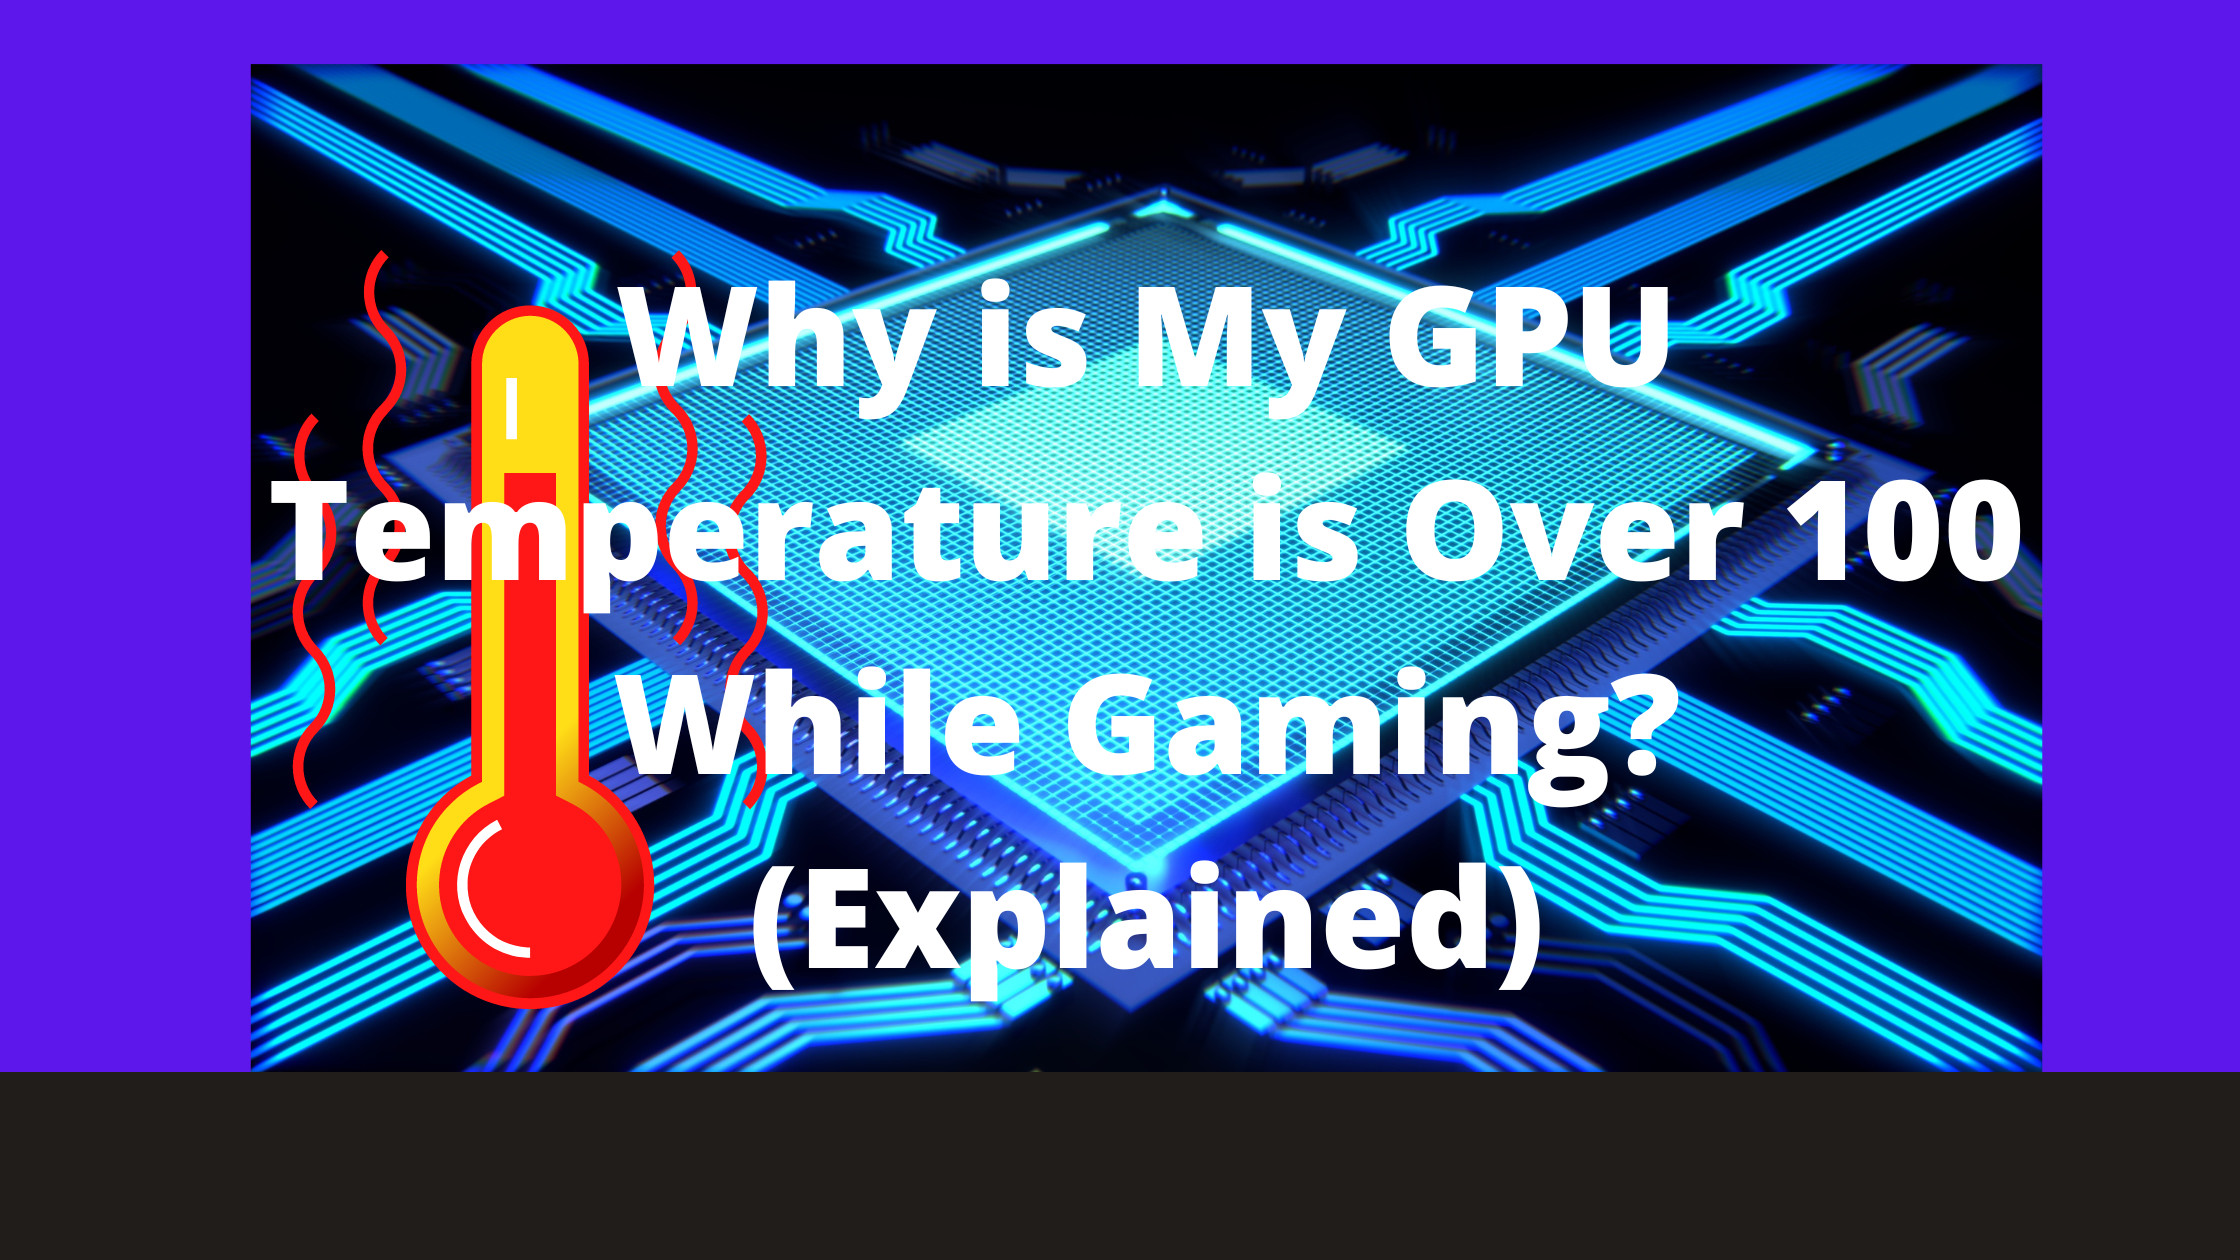 Why Do My GPU Temperature is Over 100 While Gaming? (Explained)